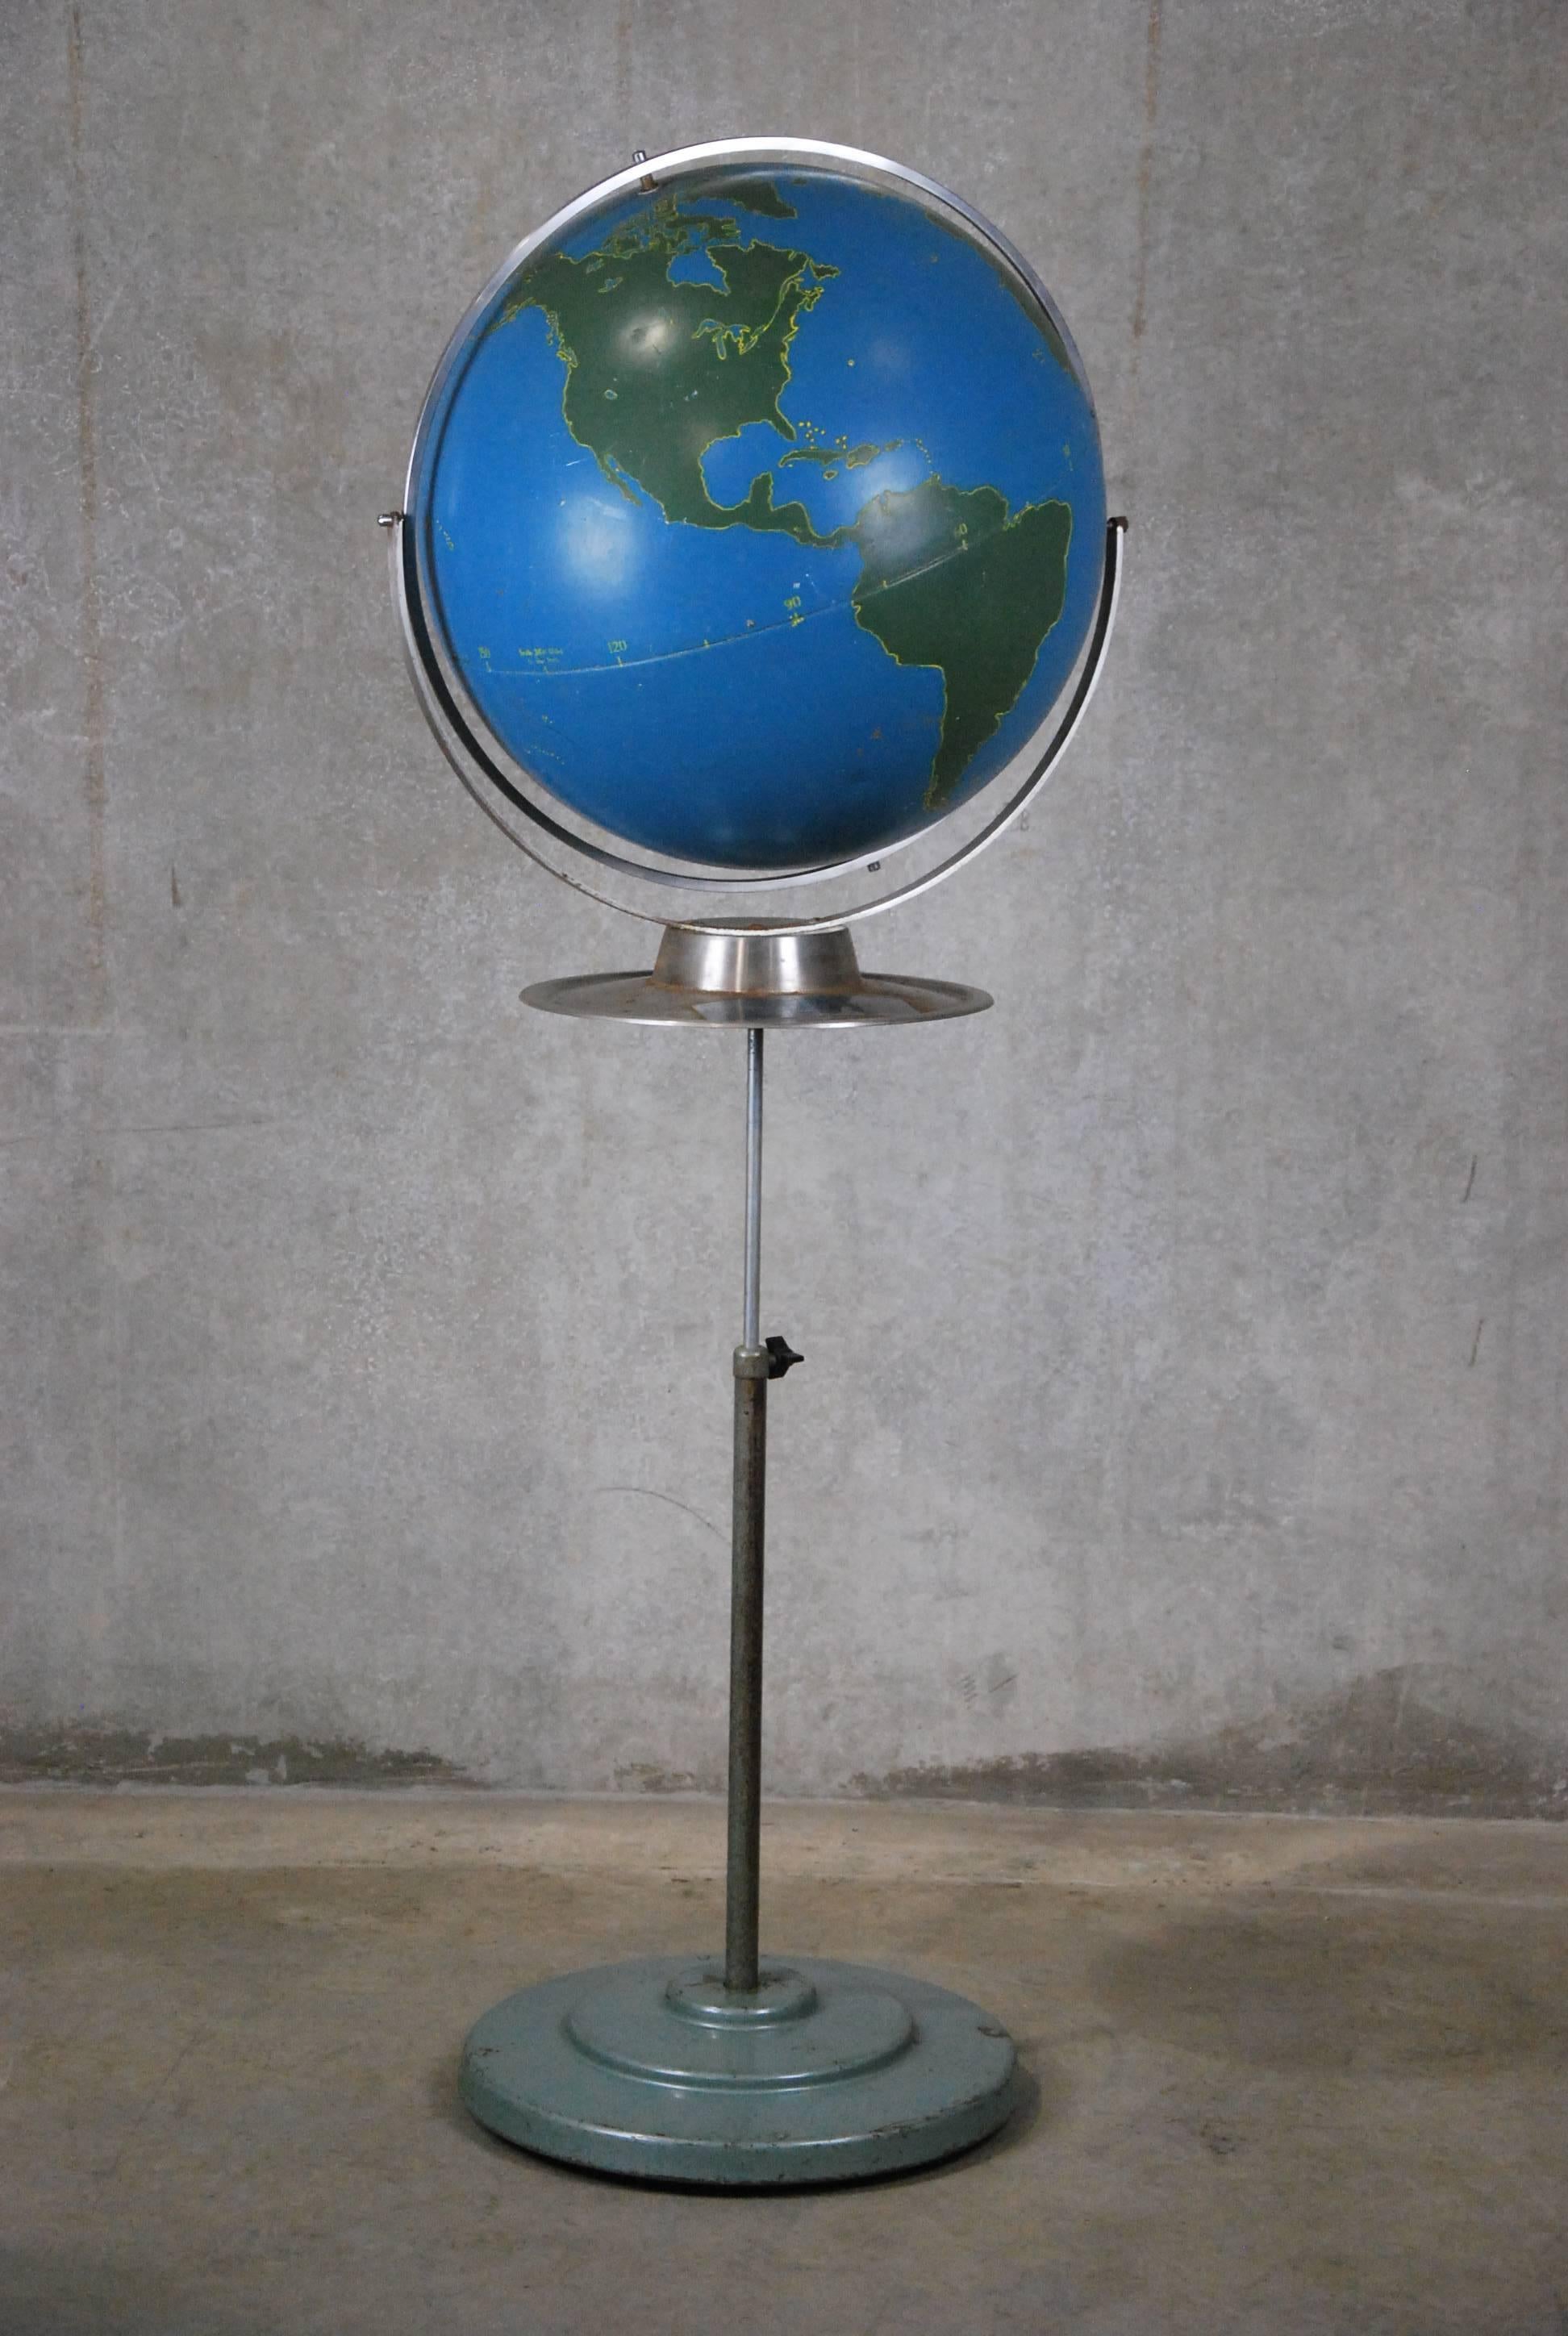 Very unusual military globe with adaptable telescoping stand.

A precision military training globe sold by “A. J. Nystrom or Maps Globes Charts Models” probably during the Korean War or later. The hollow steel orb delineates the continents,